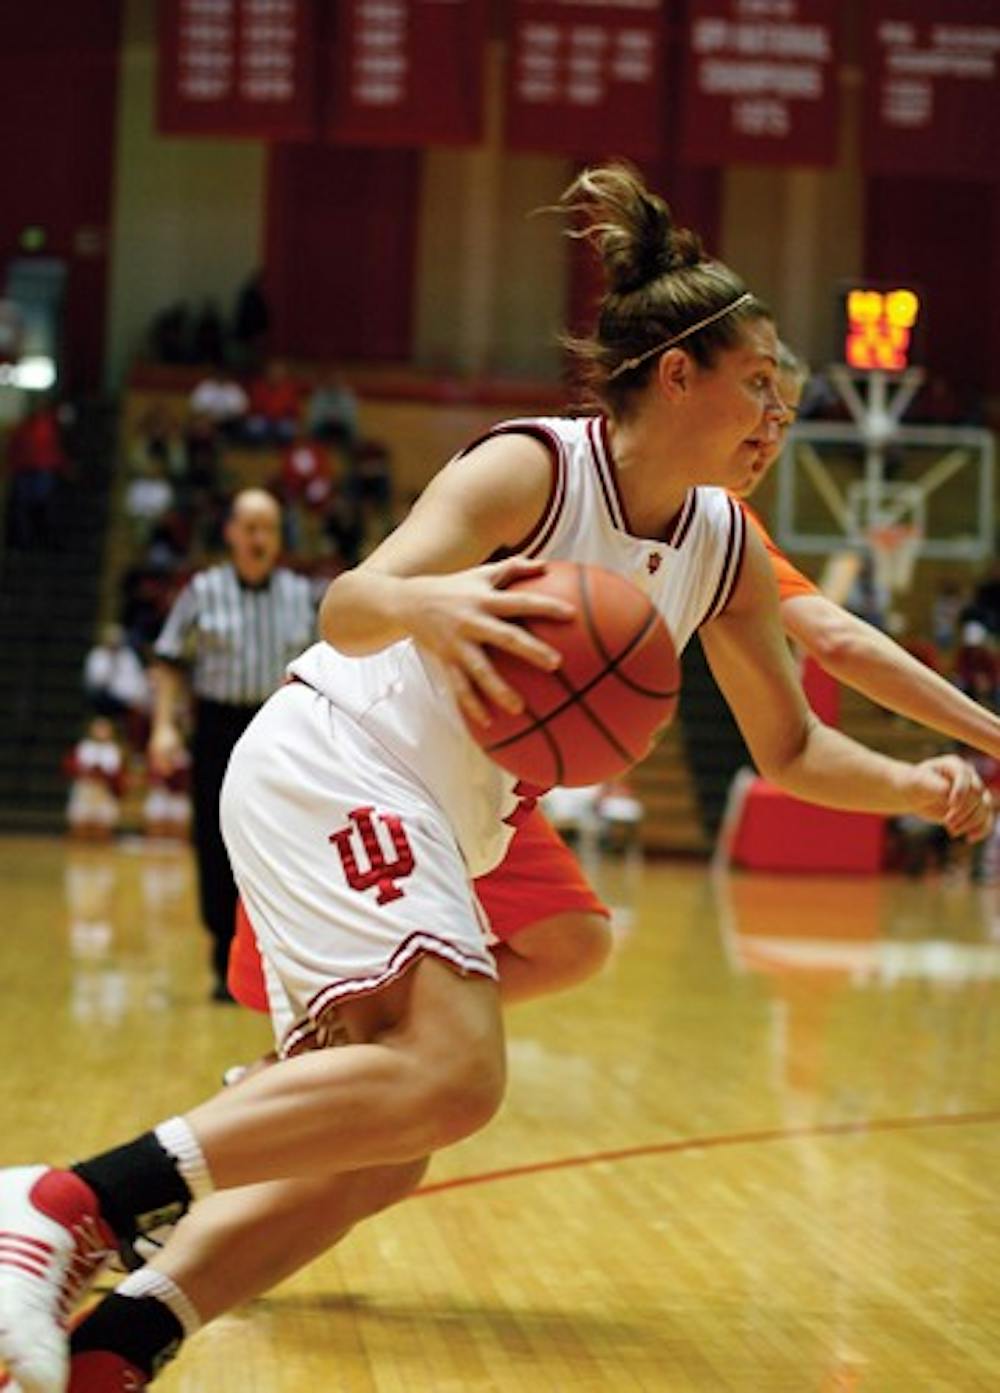 Brandon Foltz / IDS
IU senior guard Nikki Smith drives along the baseline during the Hoosiers' 70-62 win over Illinois Jan. 6 at Assembly Hall. The Hoosiers will go against Minnesota Thursday evening at 7 p.m.